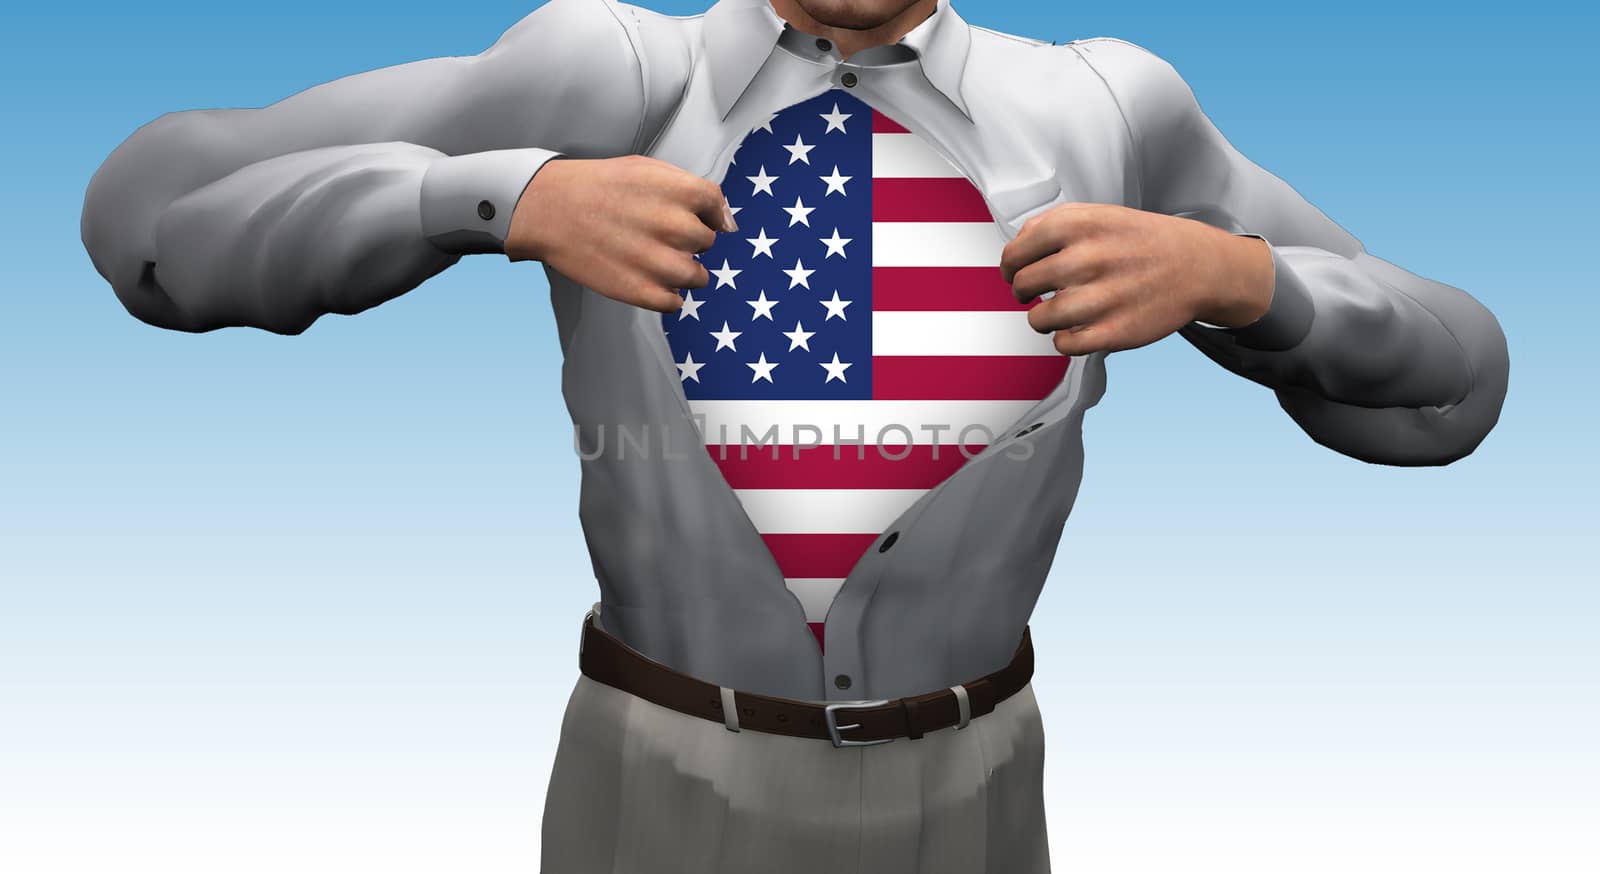 Opened shirt reveals USA Flag. 3D rendering.